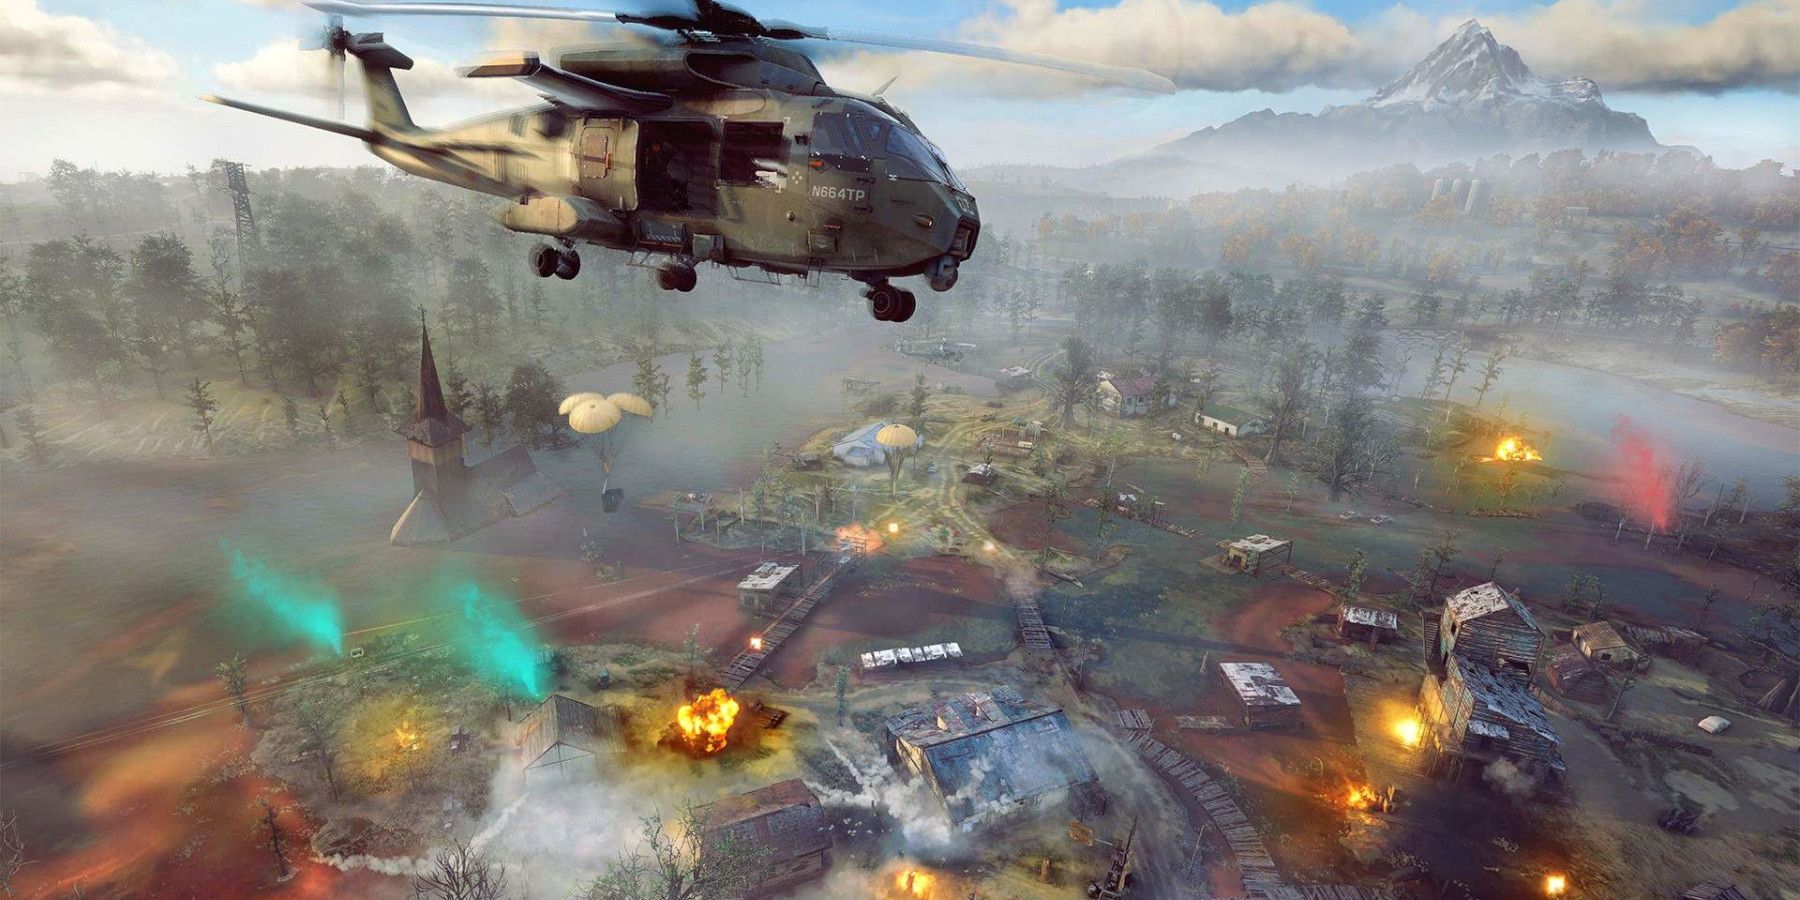 ghost-recon-frontline-trailer-shot-helicopter-over-firefight